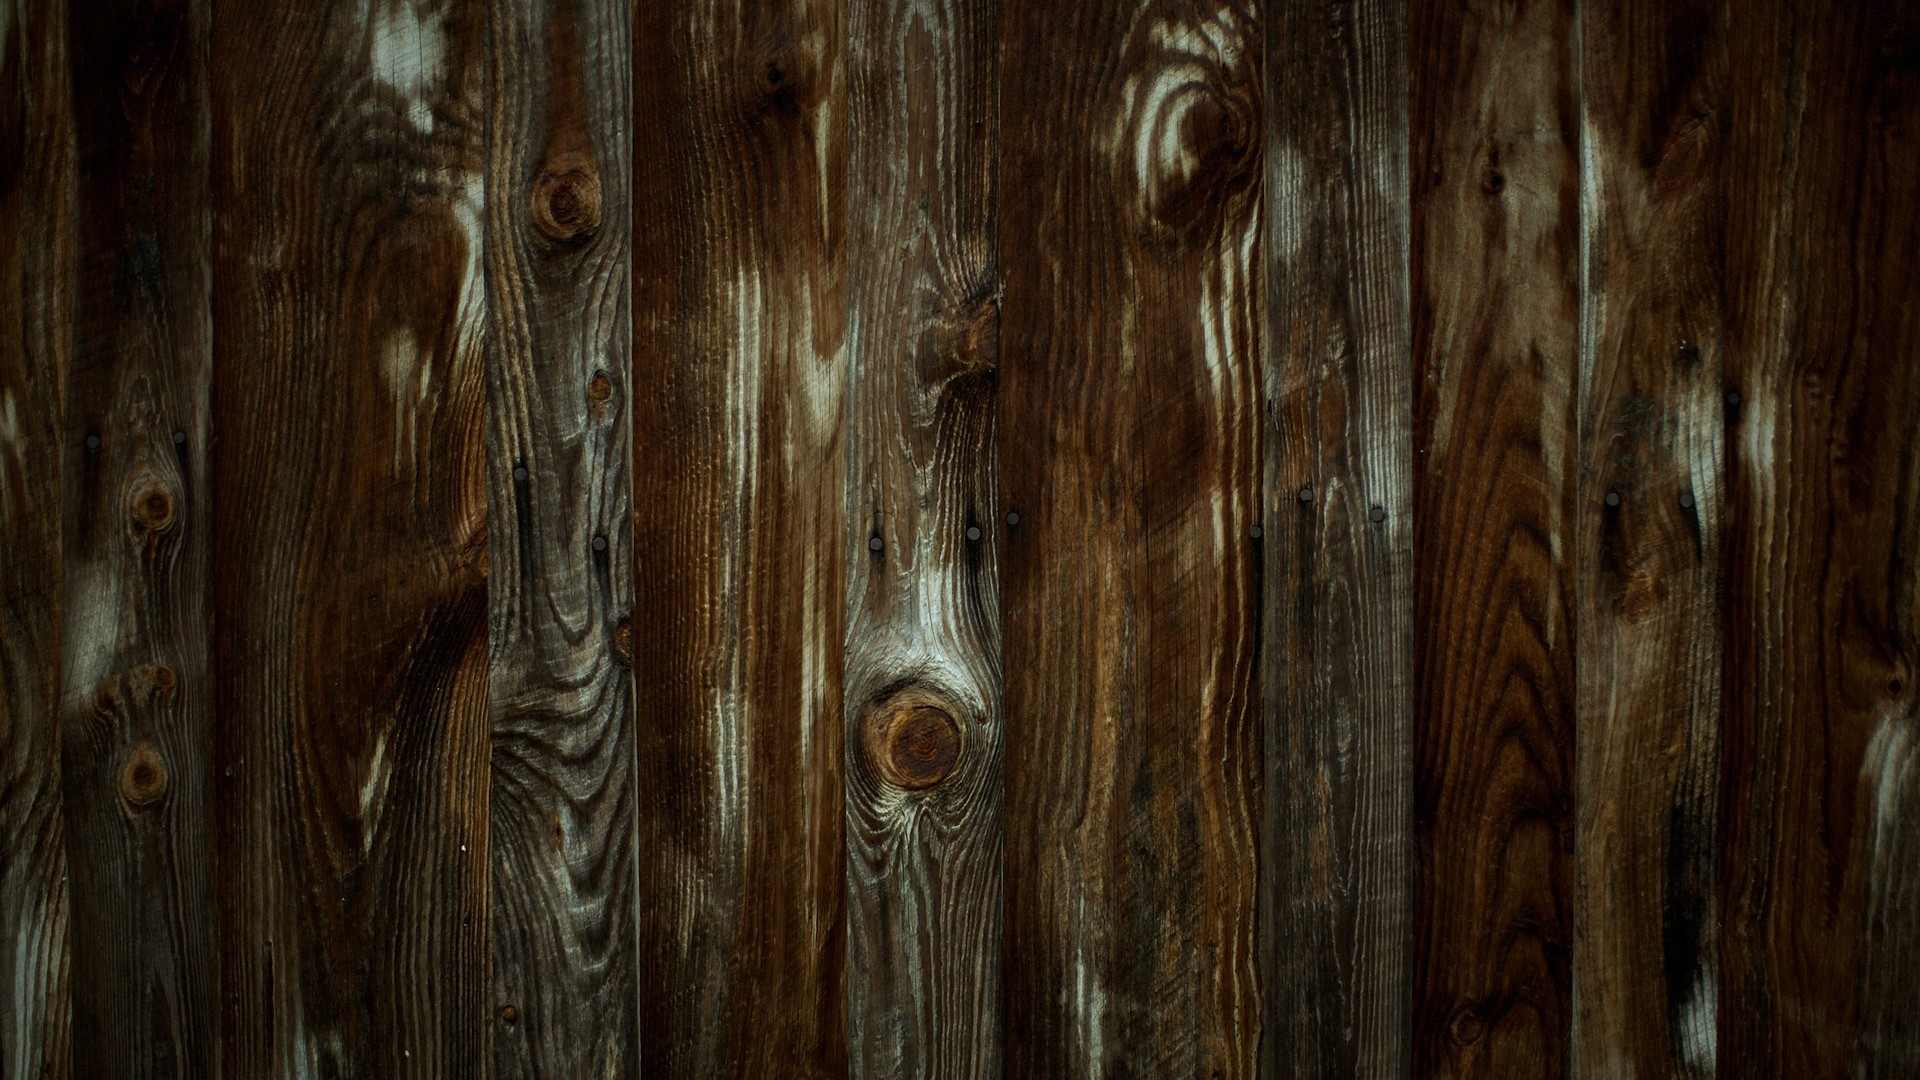 1920x1080 Get the latest wood, timber, wall news, pictures and videos and learn all  about wood, timber, wall from wallpapers4u.org, your wallpaper news source.